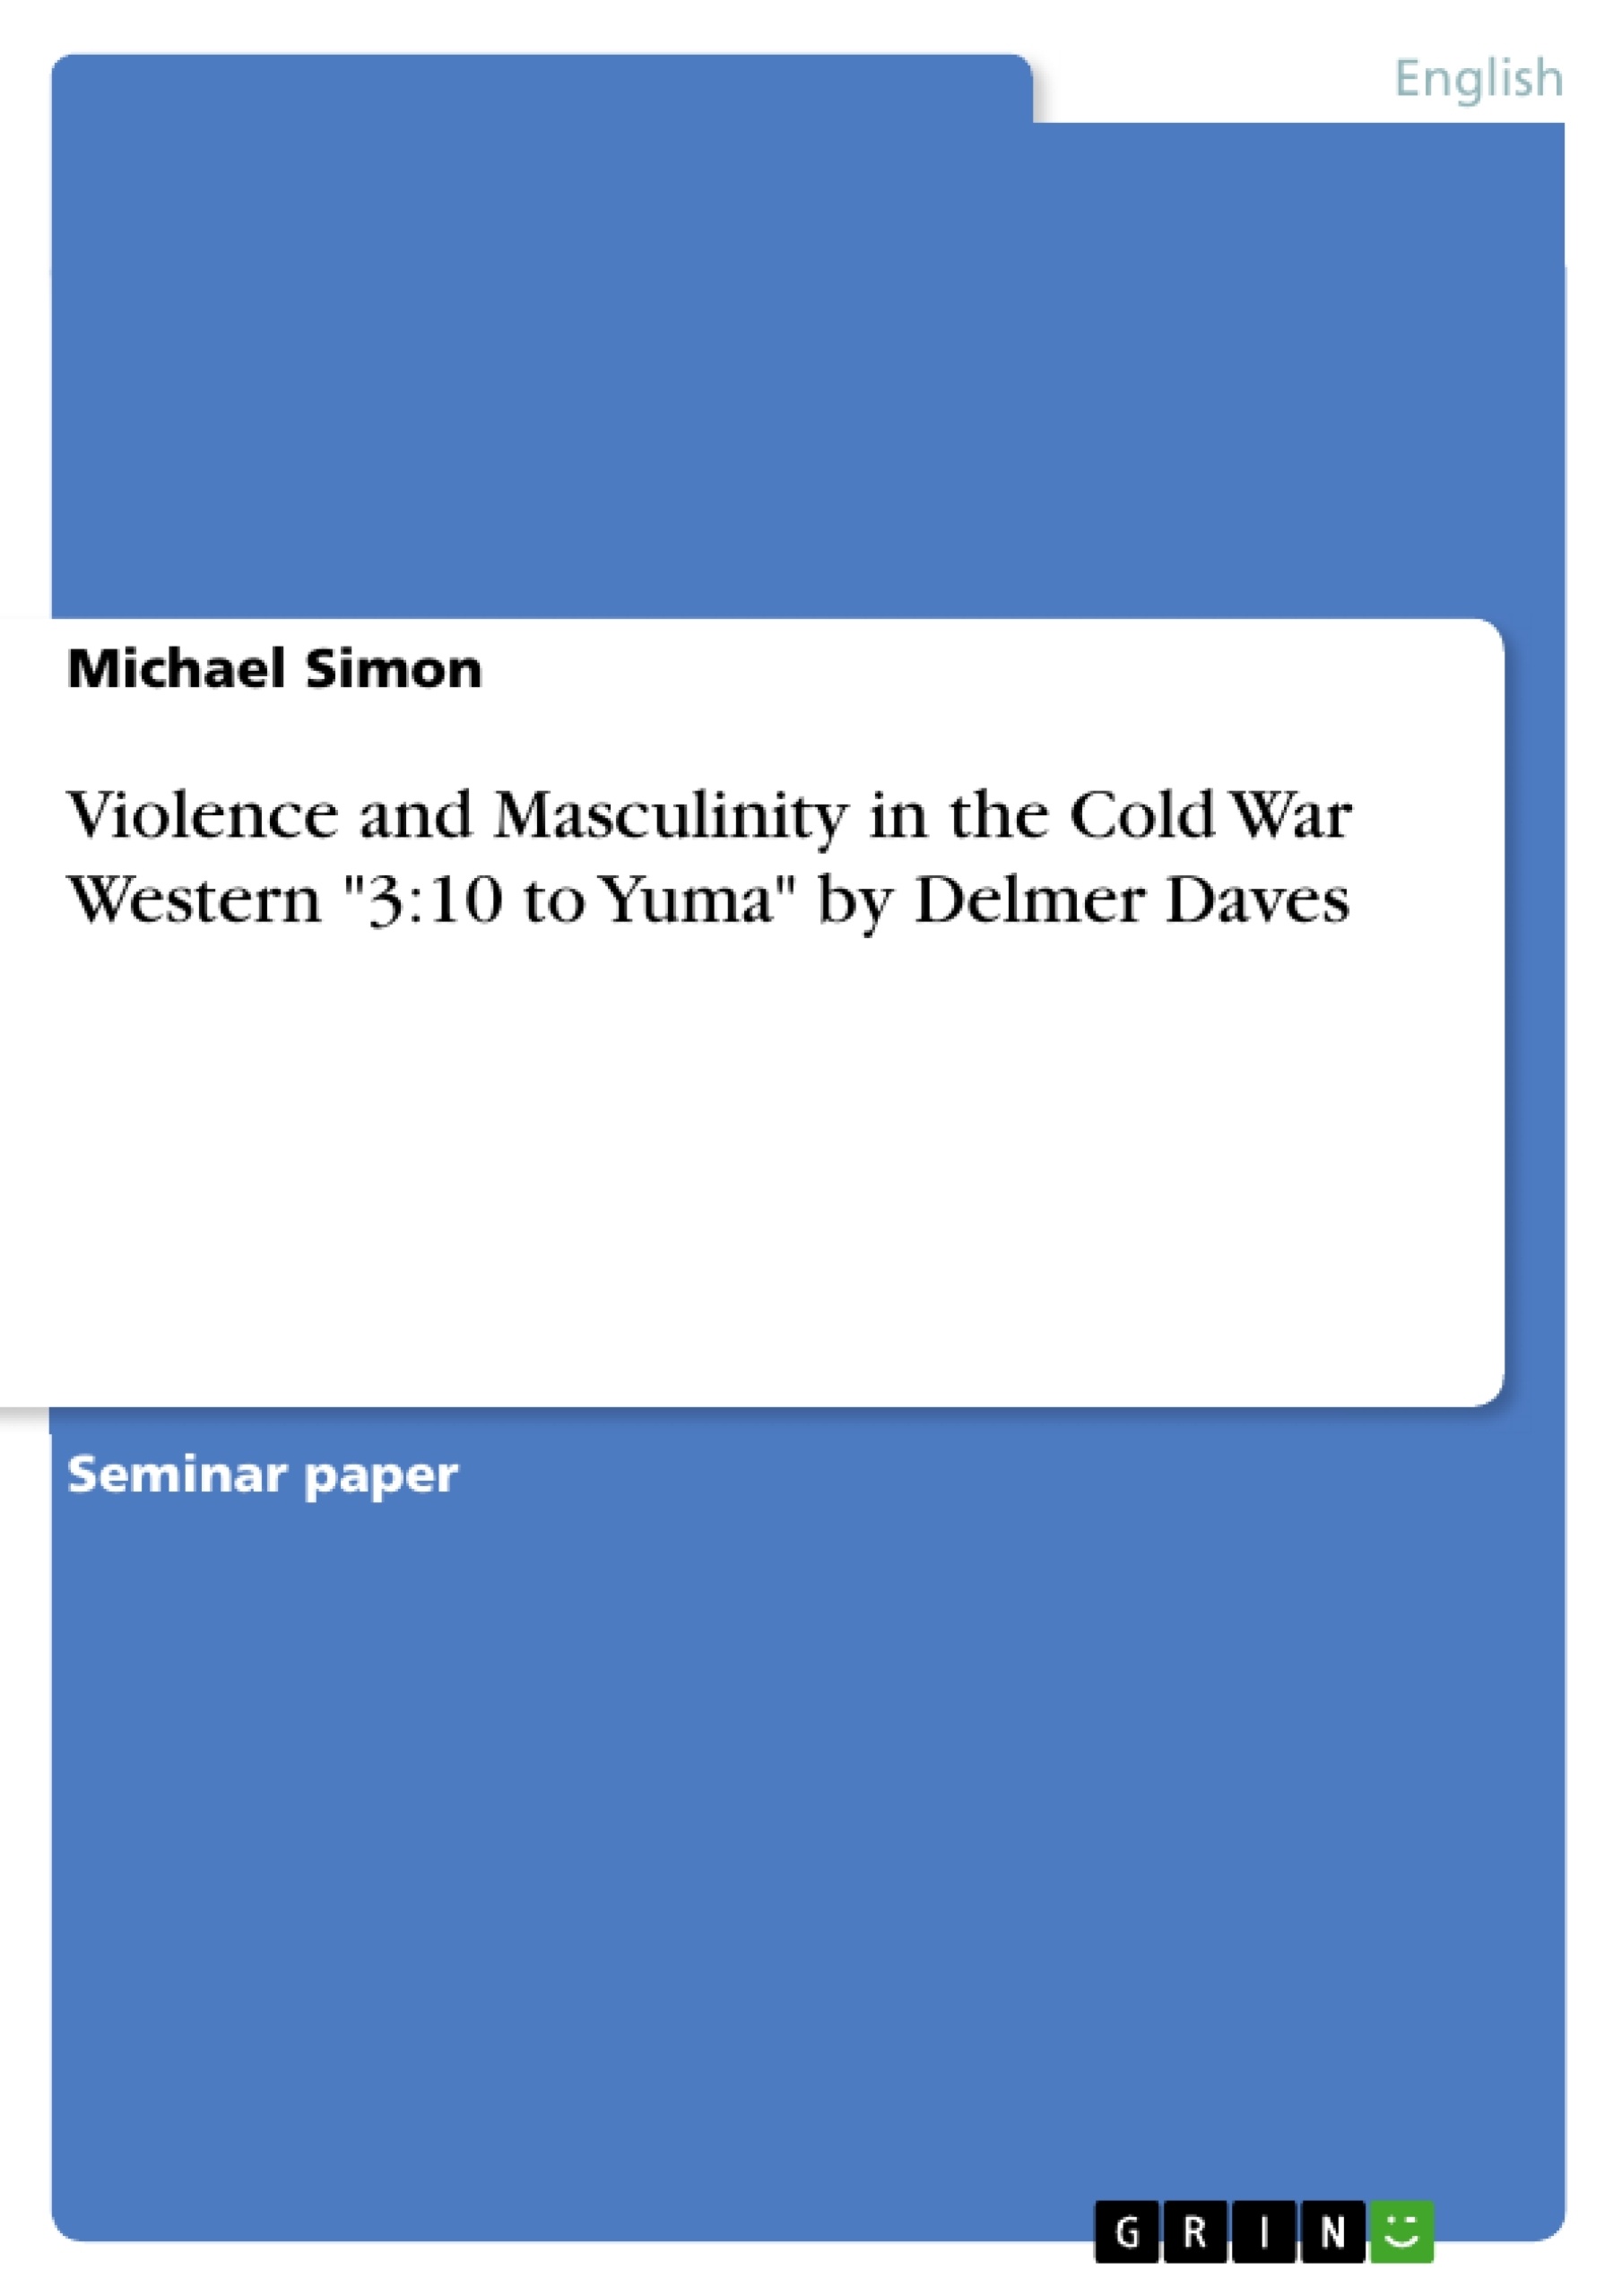 Titre: Violence and Masculinity in the Cold War Western "3:10 to Yuma" by Delmer Daves